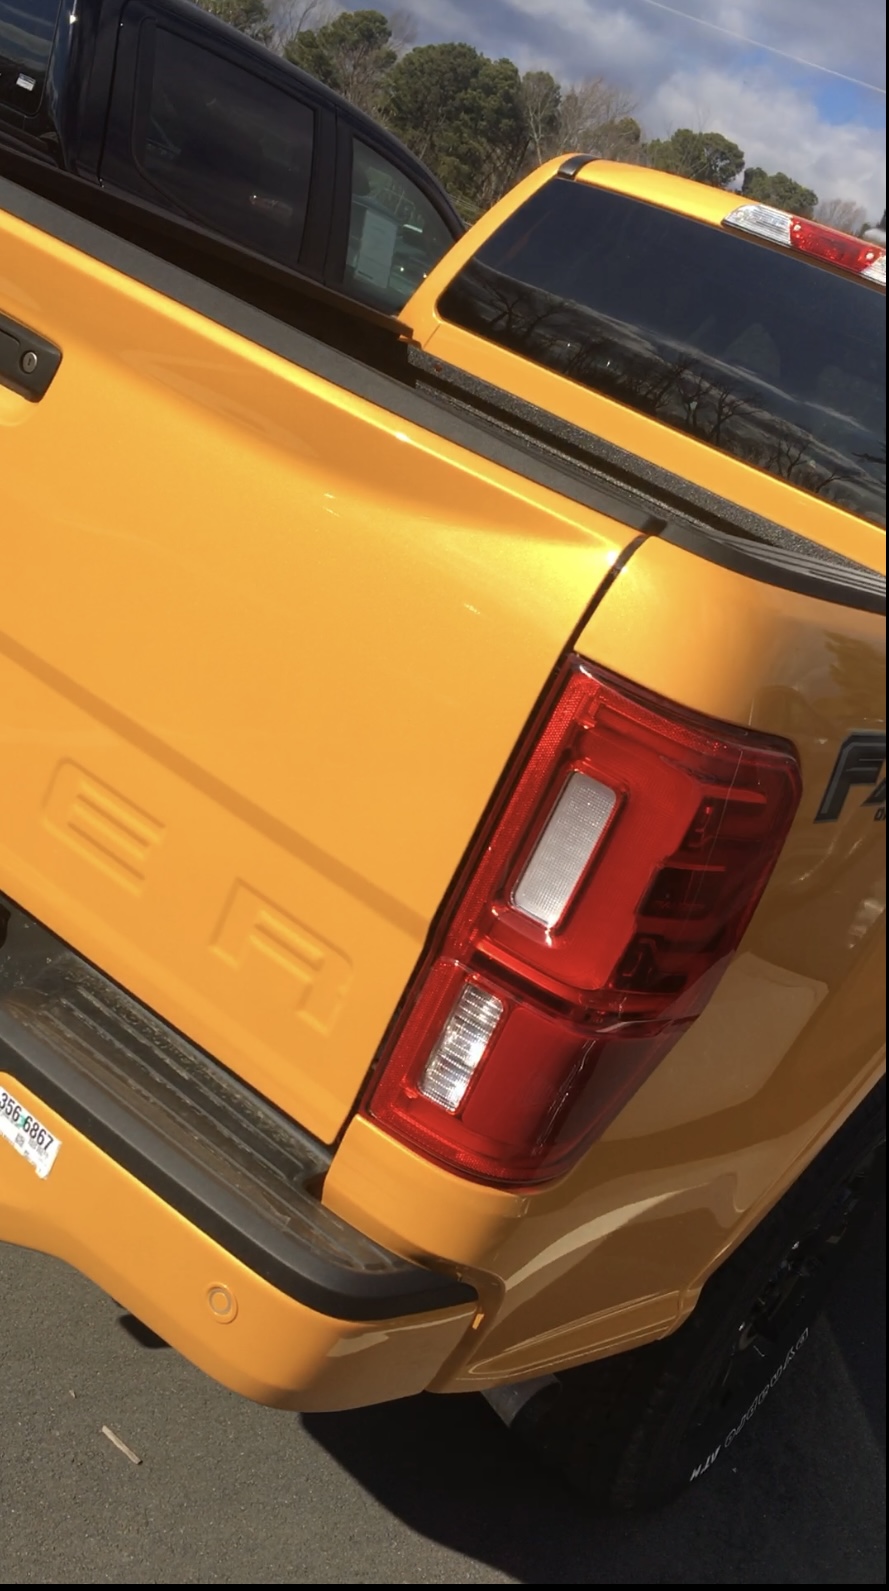 Ford Bronco Is Cyber Orange really Yellow? 33040D75-EF9E-4738-887C-B0E0D85A5389